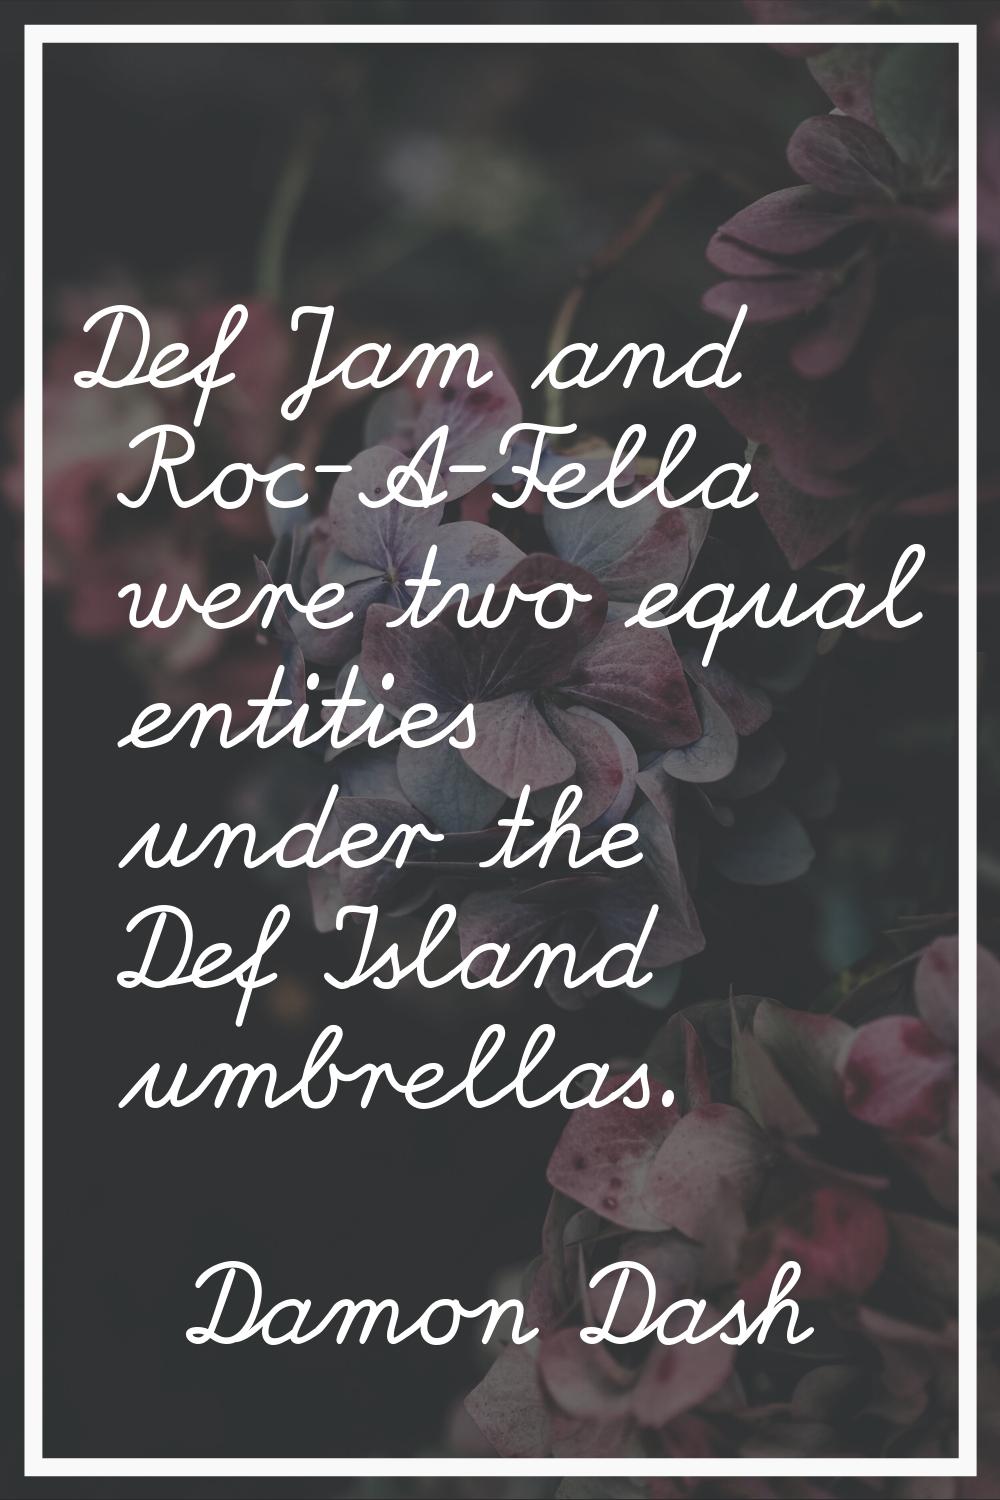 Def Jam and Roc-A-Fella were two equal entities under the Def Island umbrellas.